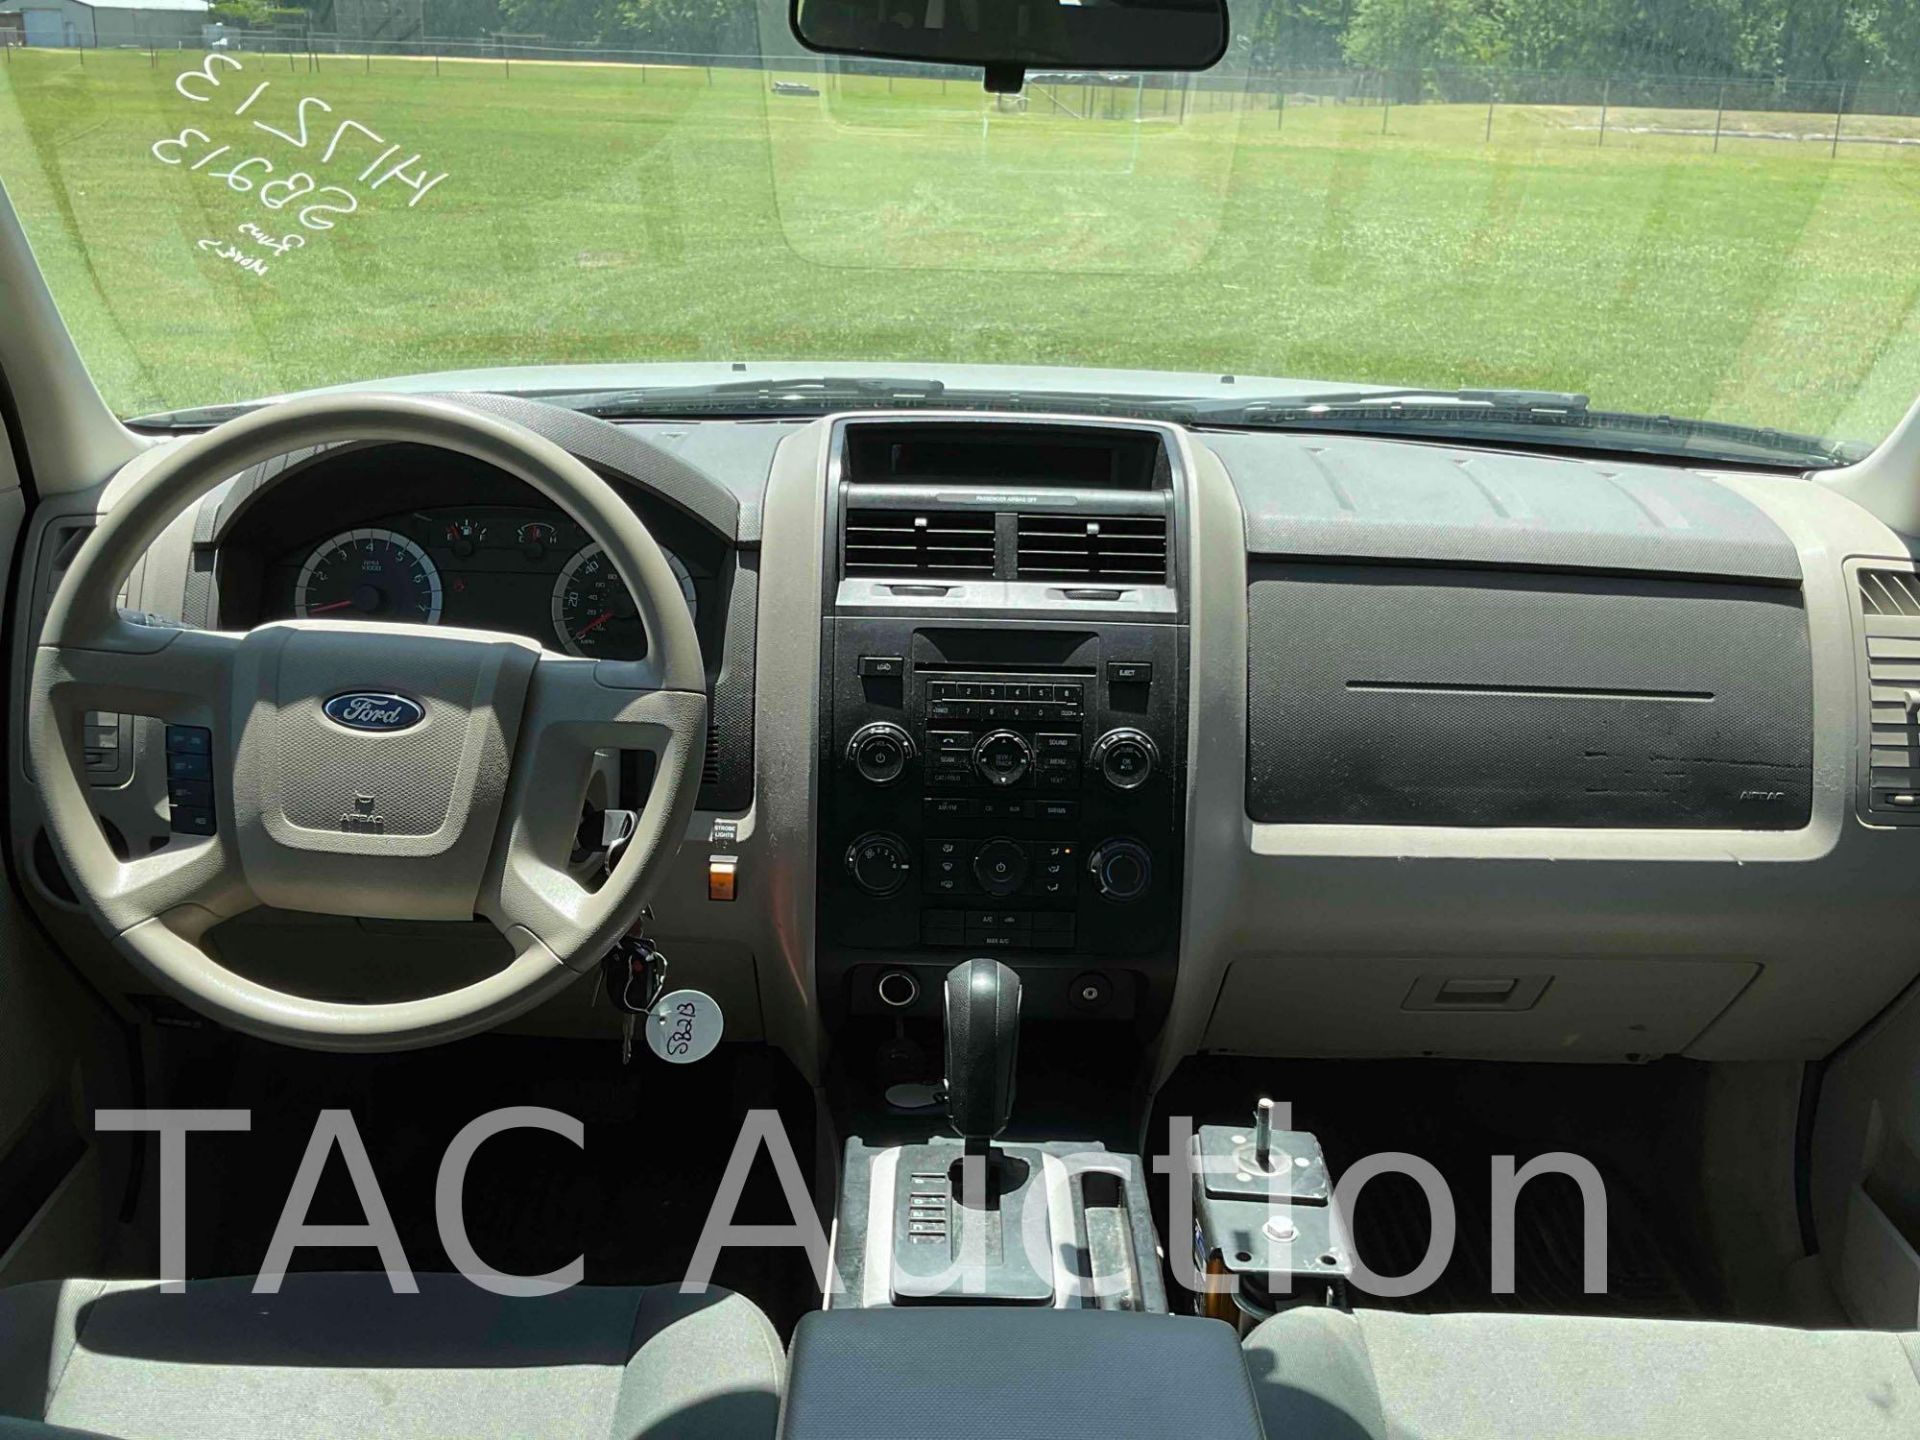 2011 Ford Escape XLS 4X4 SUV - Image 25 of 53